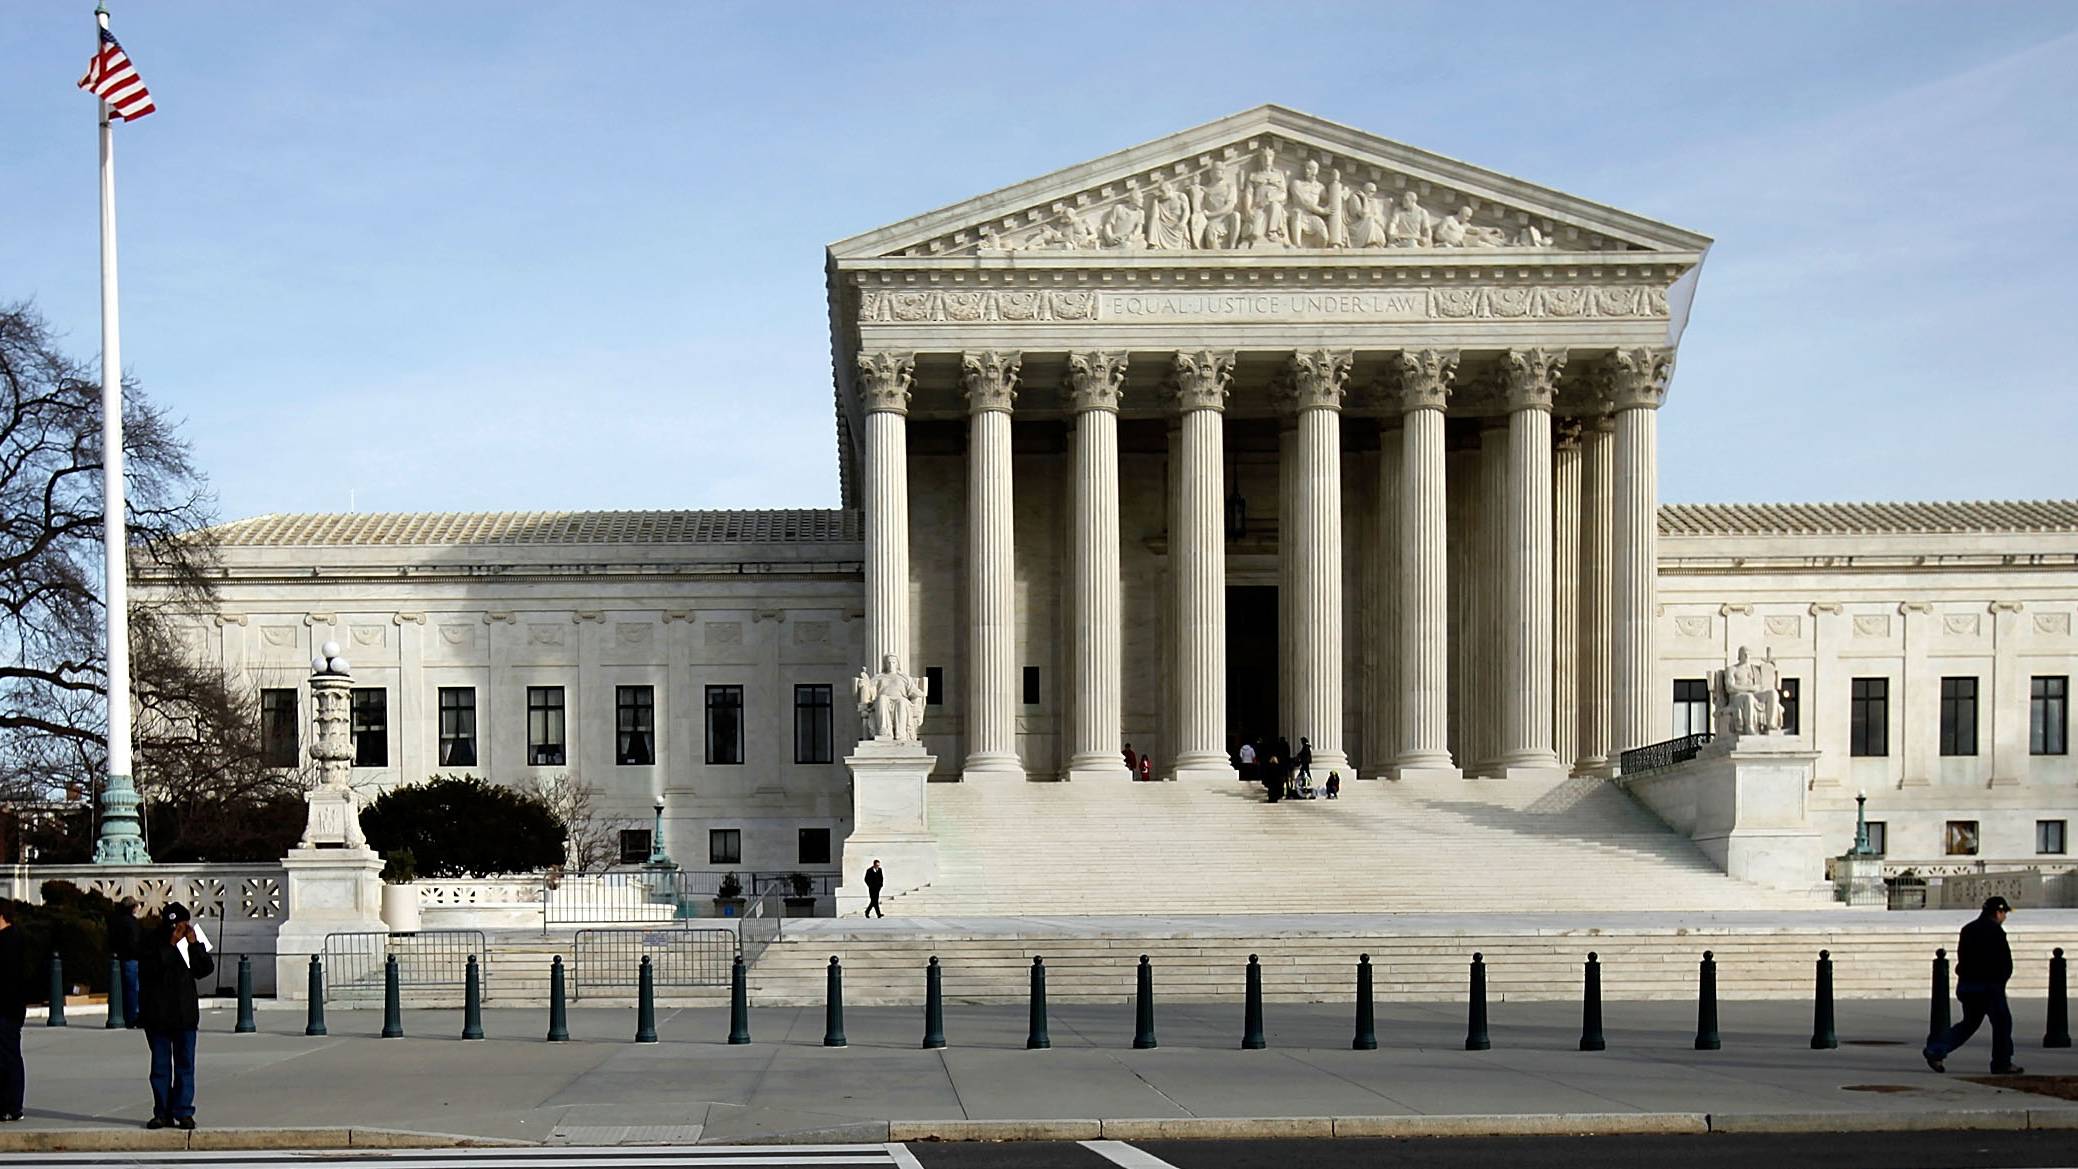 How Did Super PACs Come Into Play? - In 2010, the U.S. Supreme Court lifted a ban that prohibited corporations and unions from independently spending money to influence federal elections. A subsequent court ruling in&nbsp;SpeechNow.org v. Federal Election Commission (FEC), created Super PACs as they are now defined.(Photo: Allison Joyce/Getty Images)